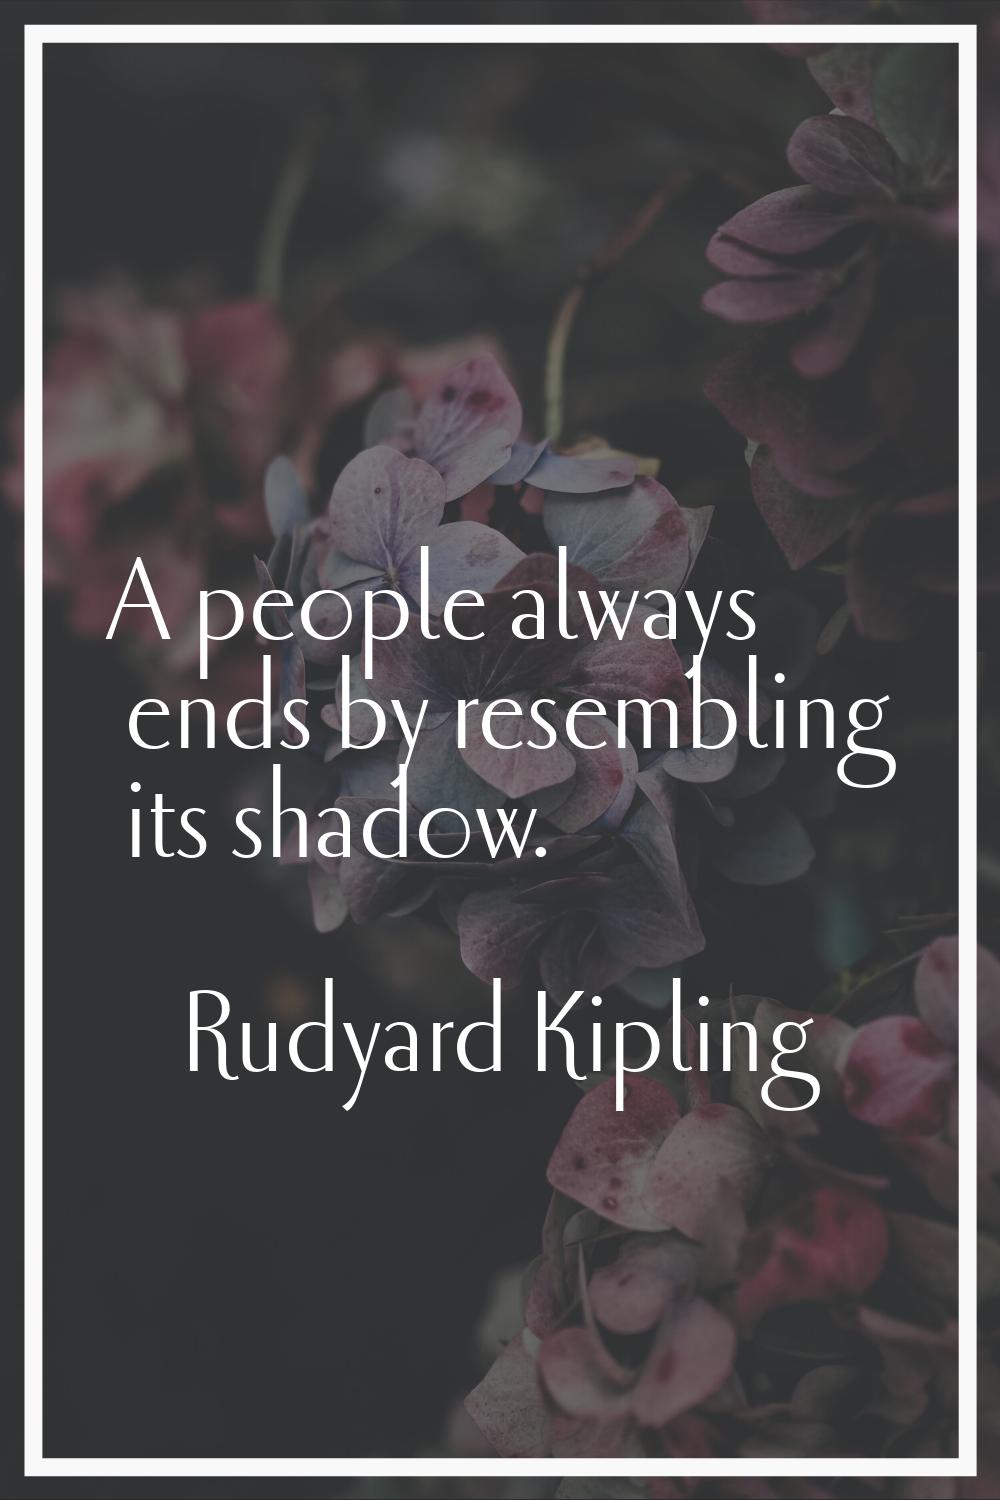 A people always ends by resembling its shadow.